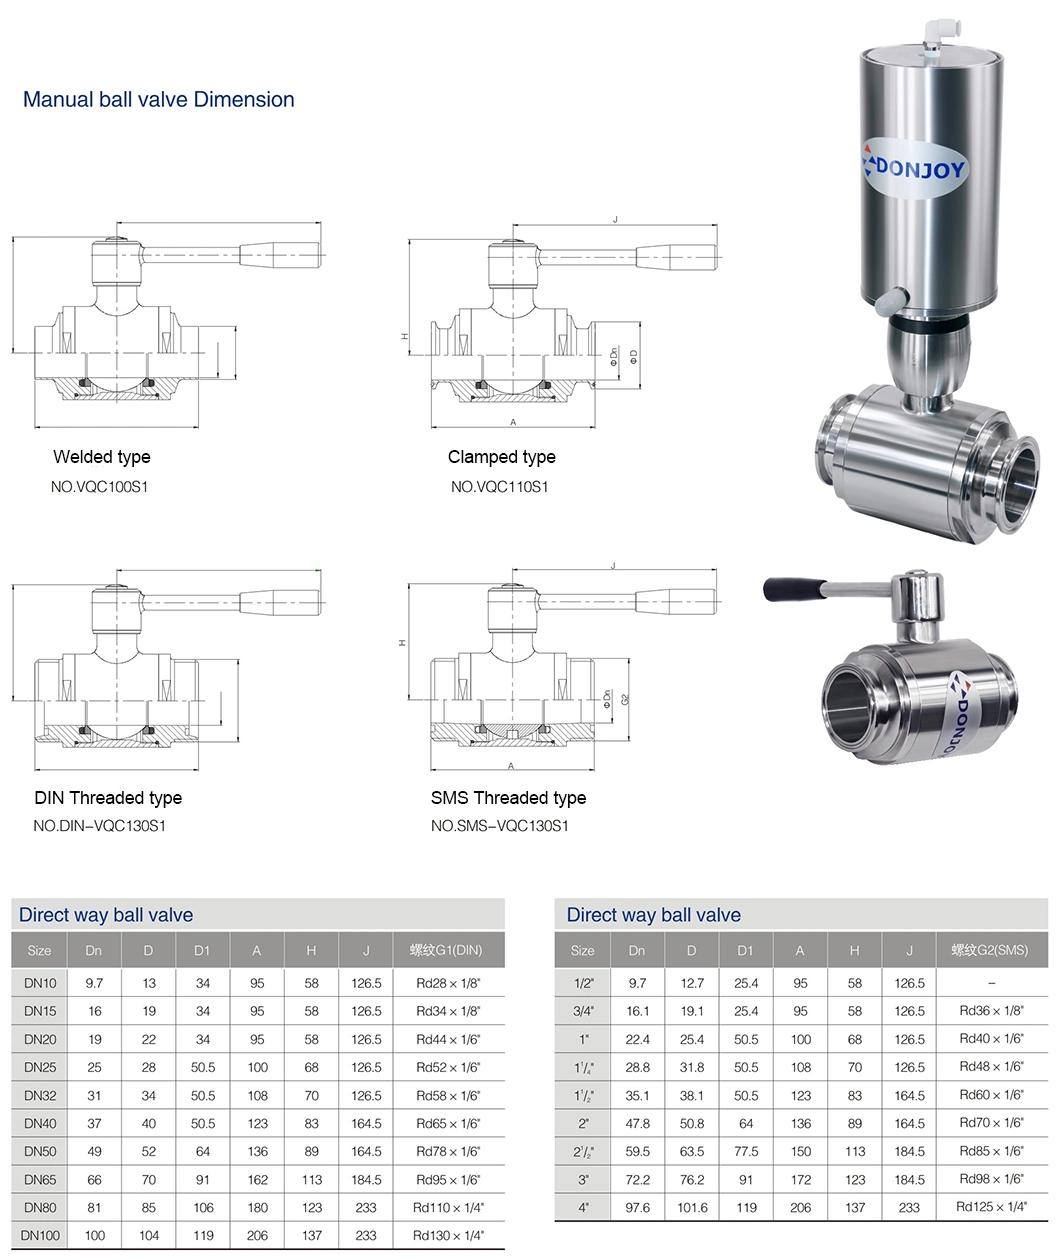 Us 3A Sanitary 3-Way Ball Valve with Pull Handle